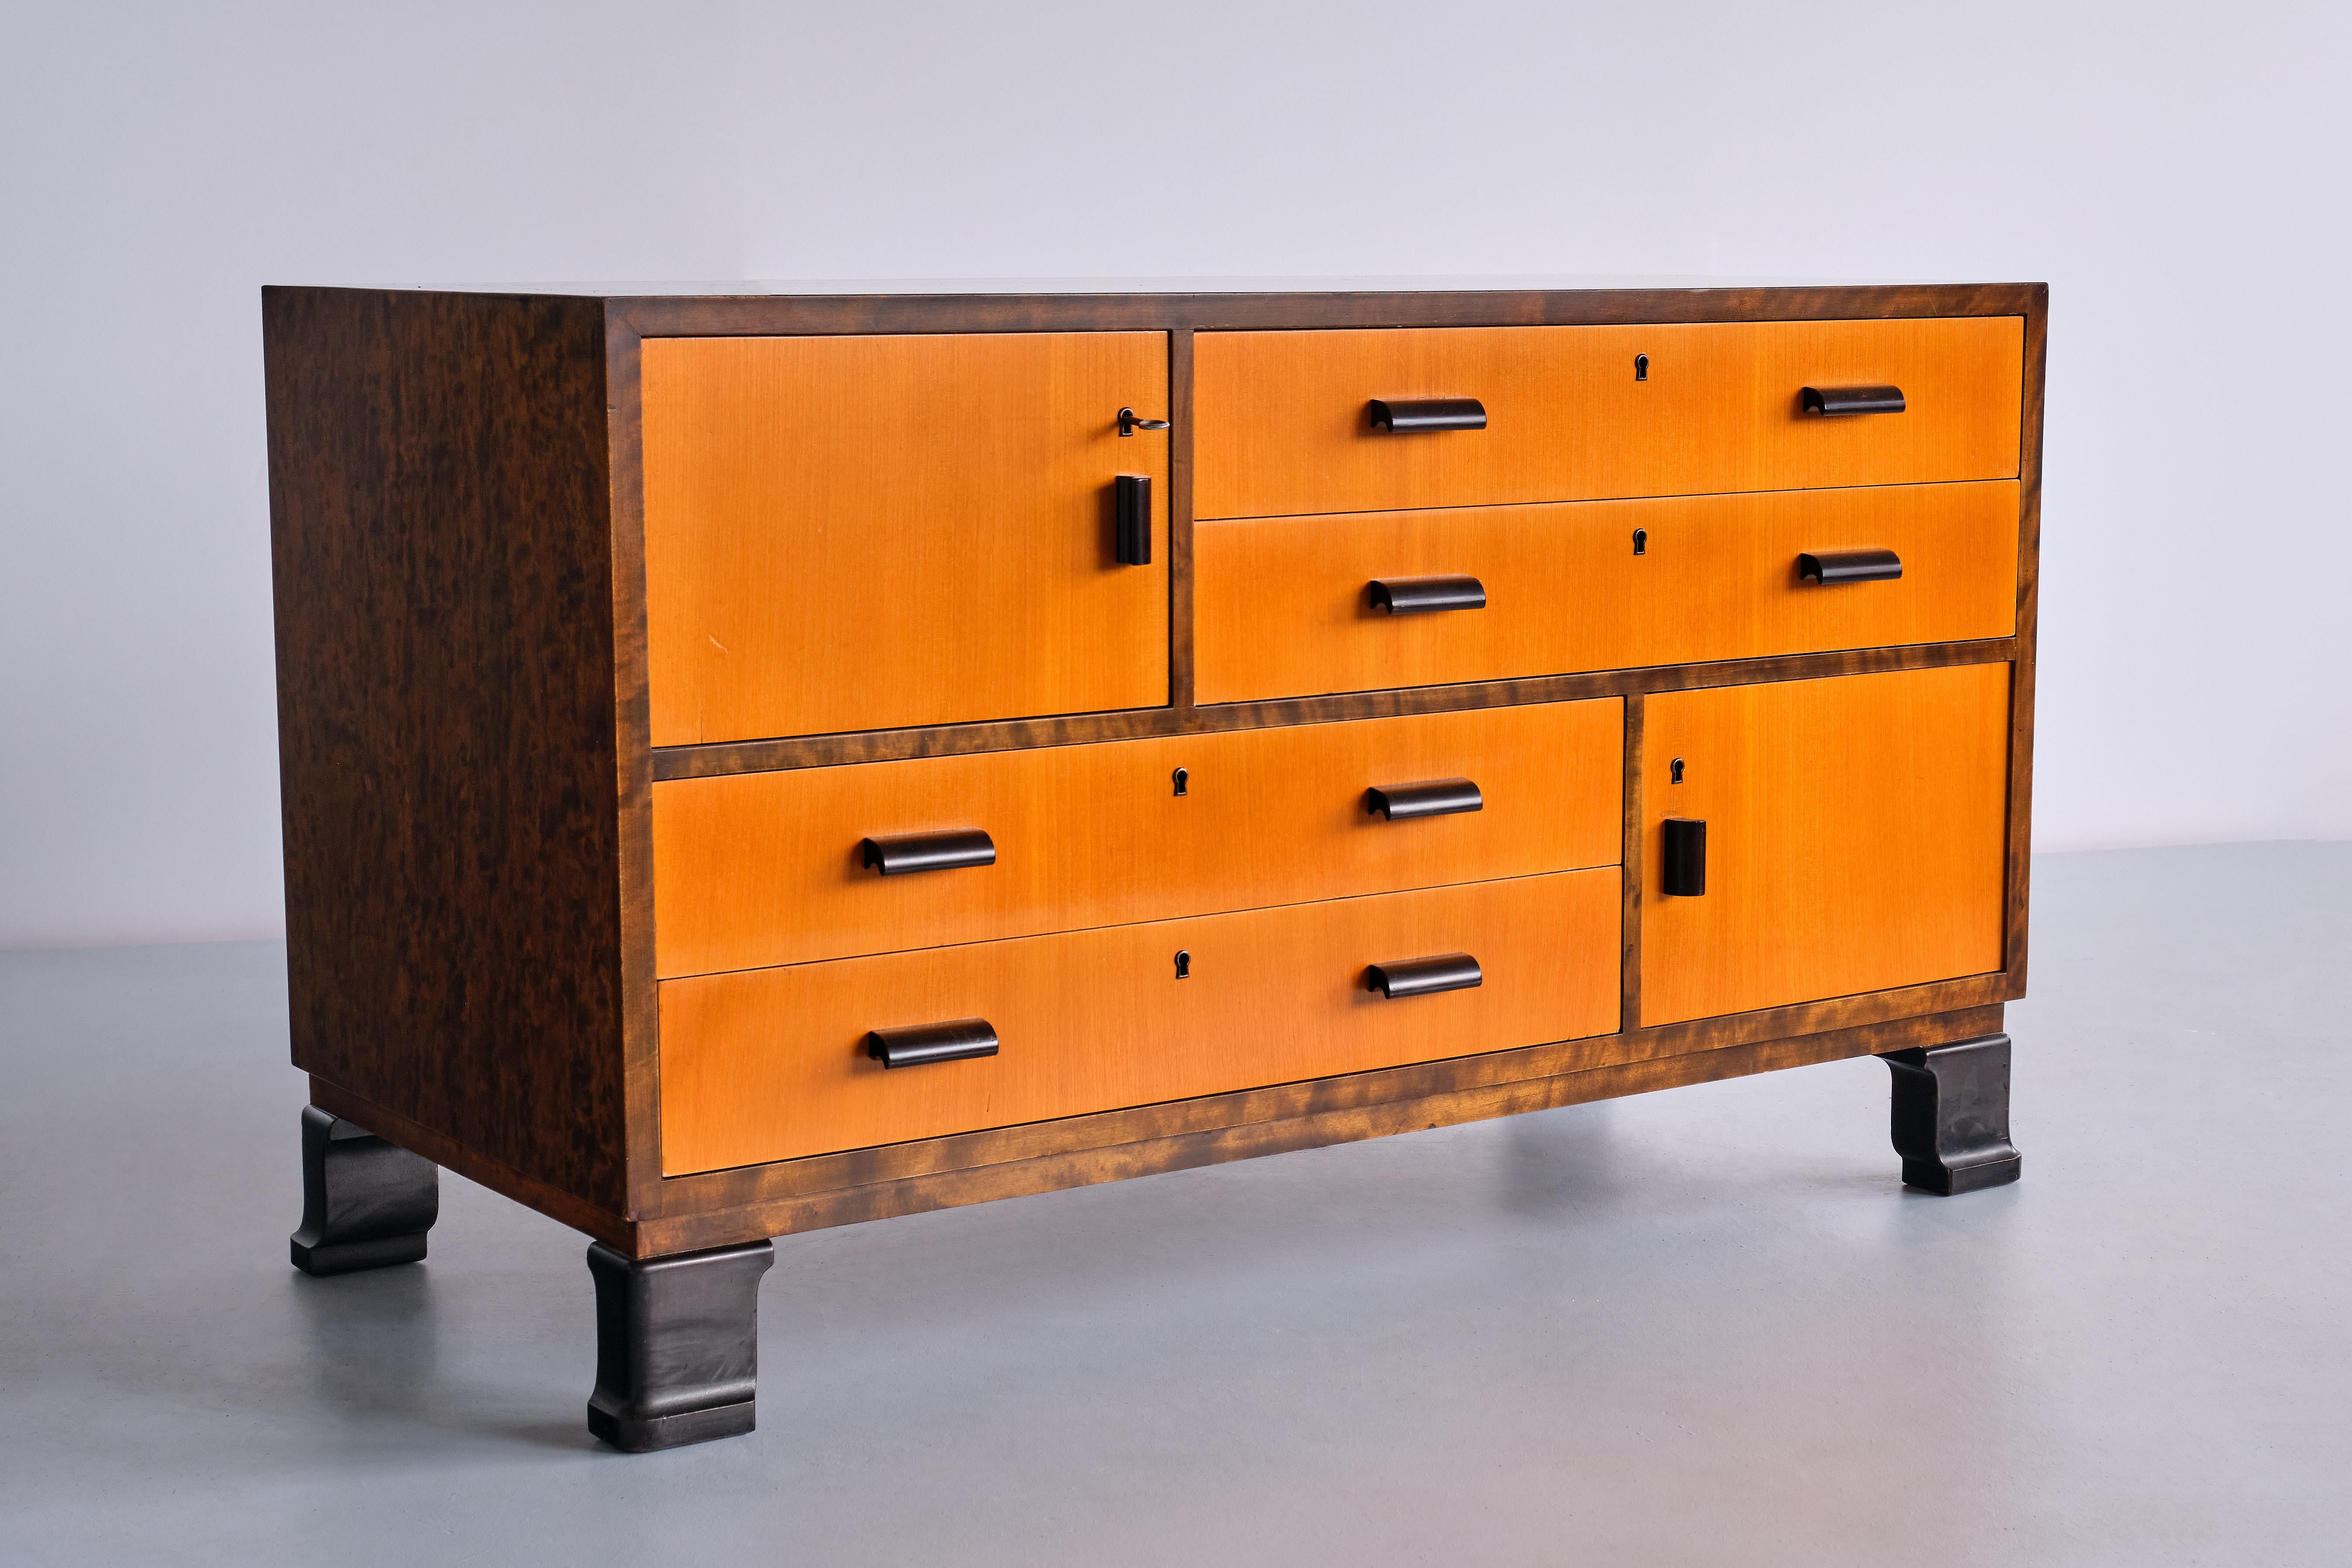 Pair of Axel Larsson Sideboards in Elm and Birch, SMF Bodafors, Sweden, 1940s For Sale 2